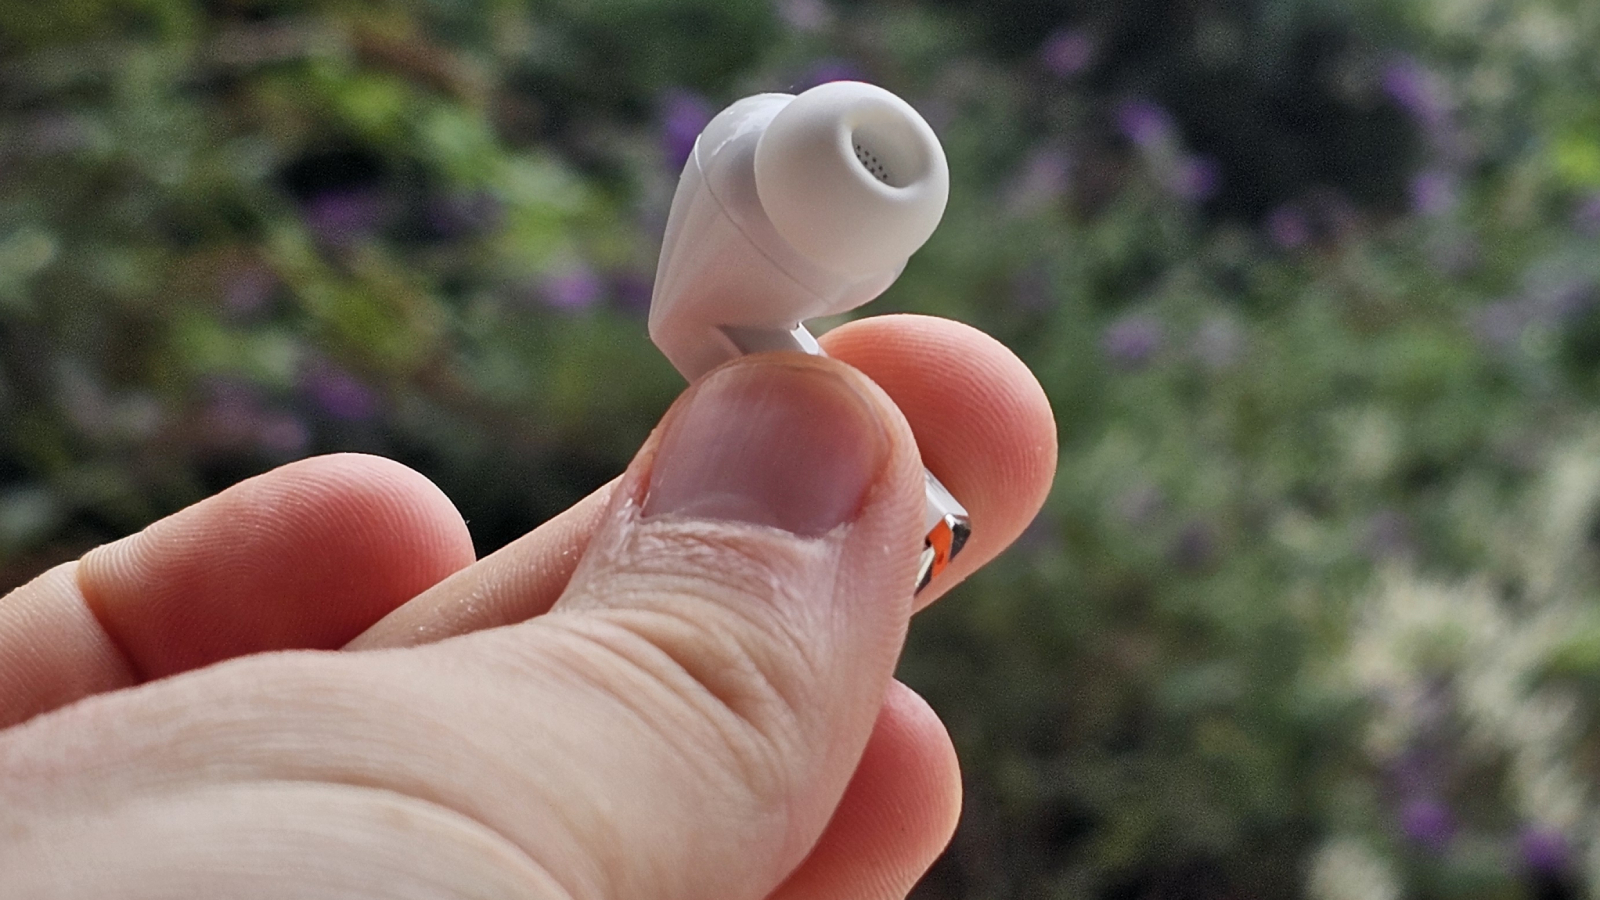 The Samsung Galaxy Buds 3 Pro against a leafy background.